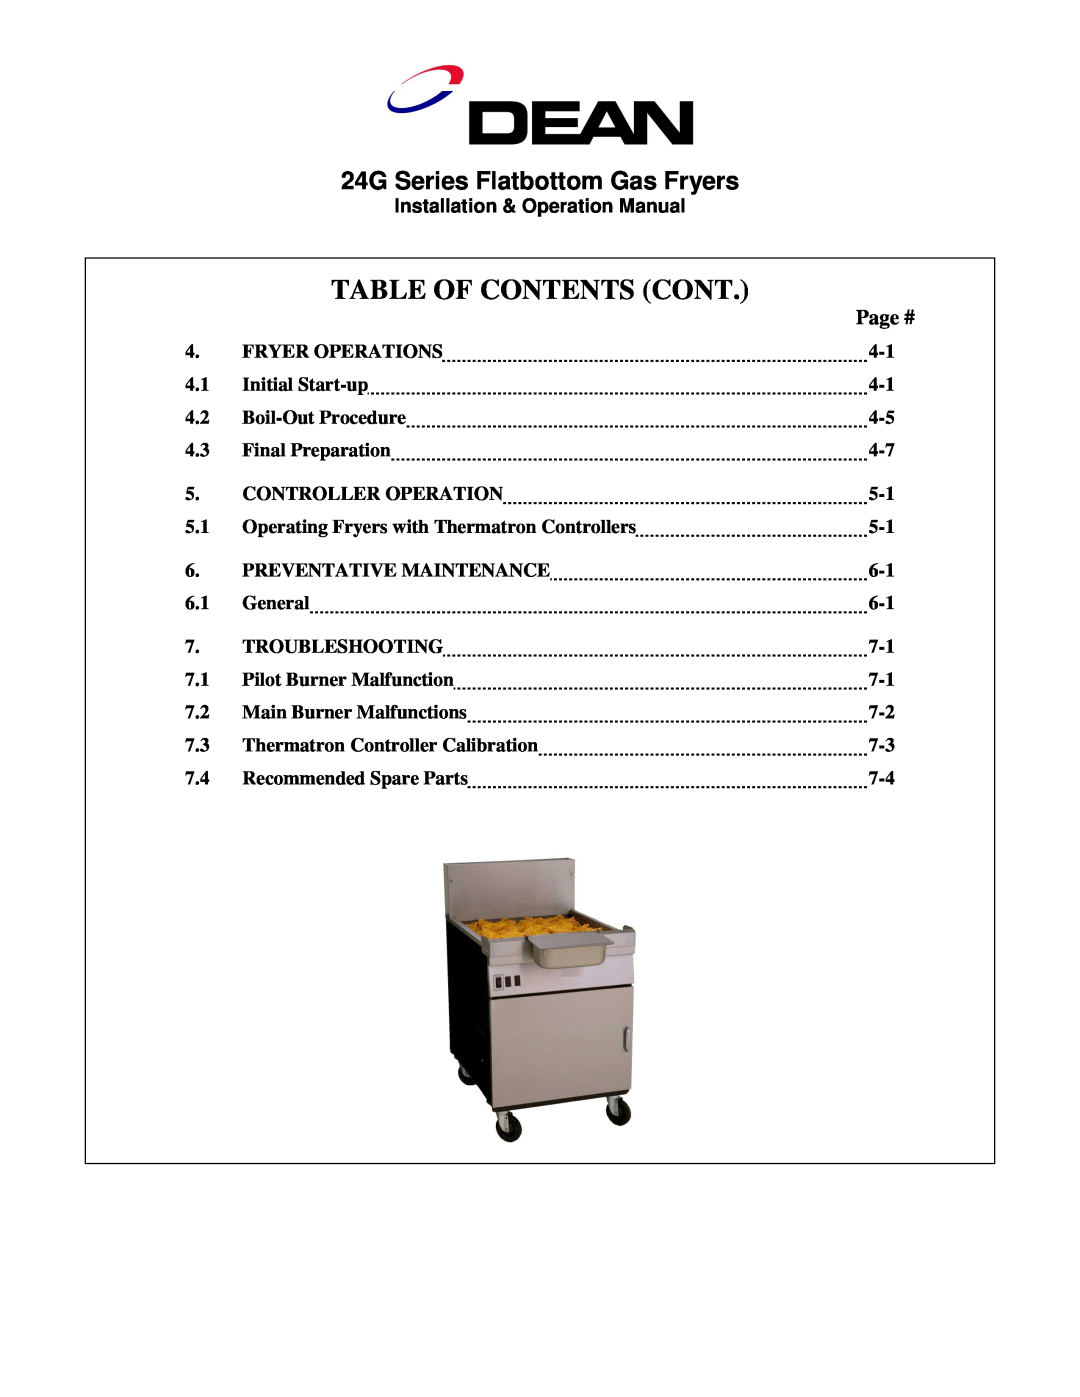 Frymaster operation manual Table Of Contents Cont, 24G Series Flatbottom Gas Fryers, Page # 